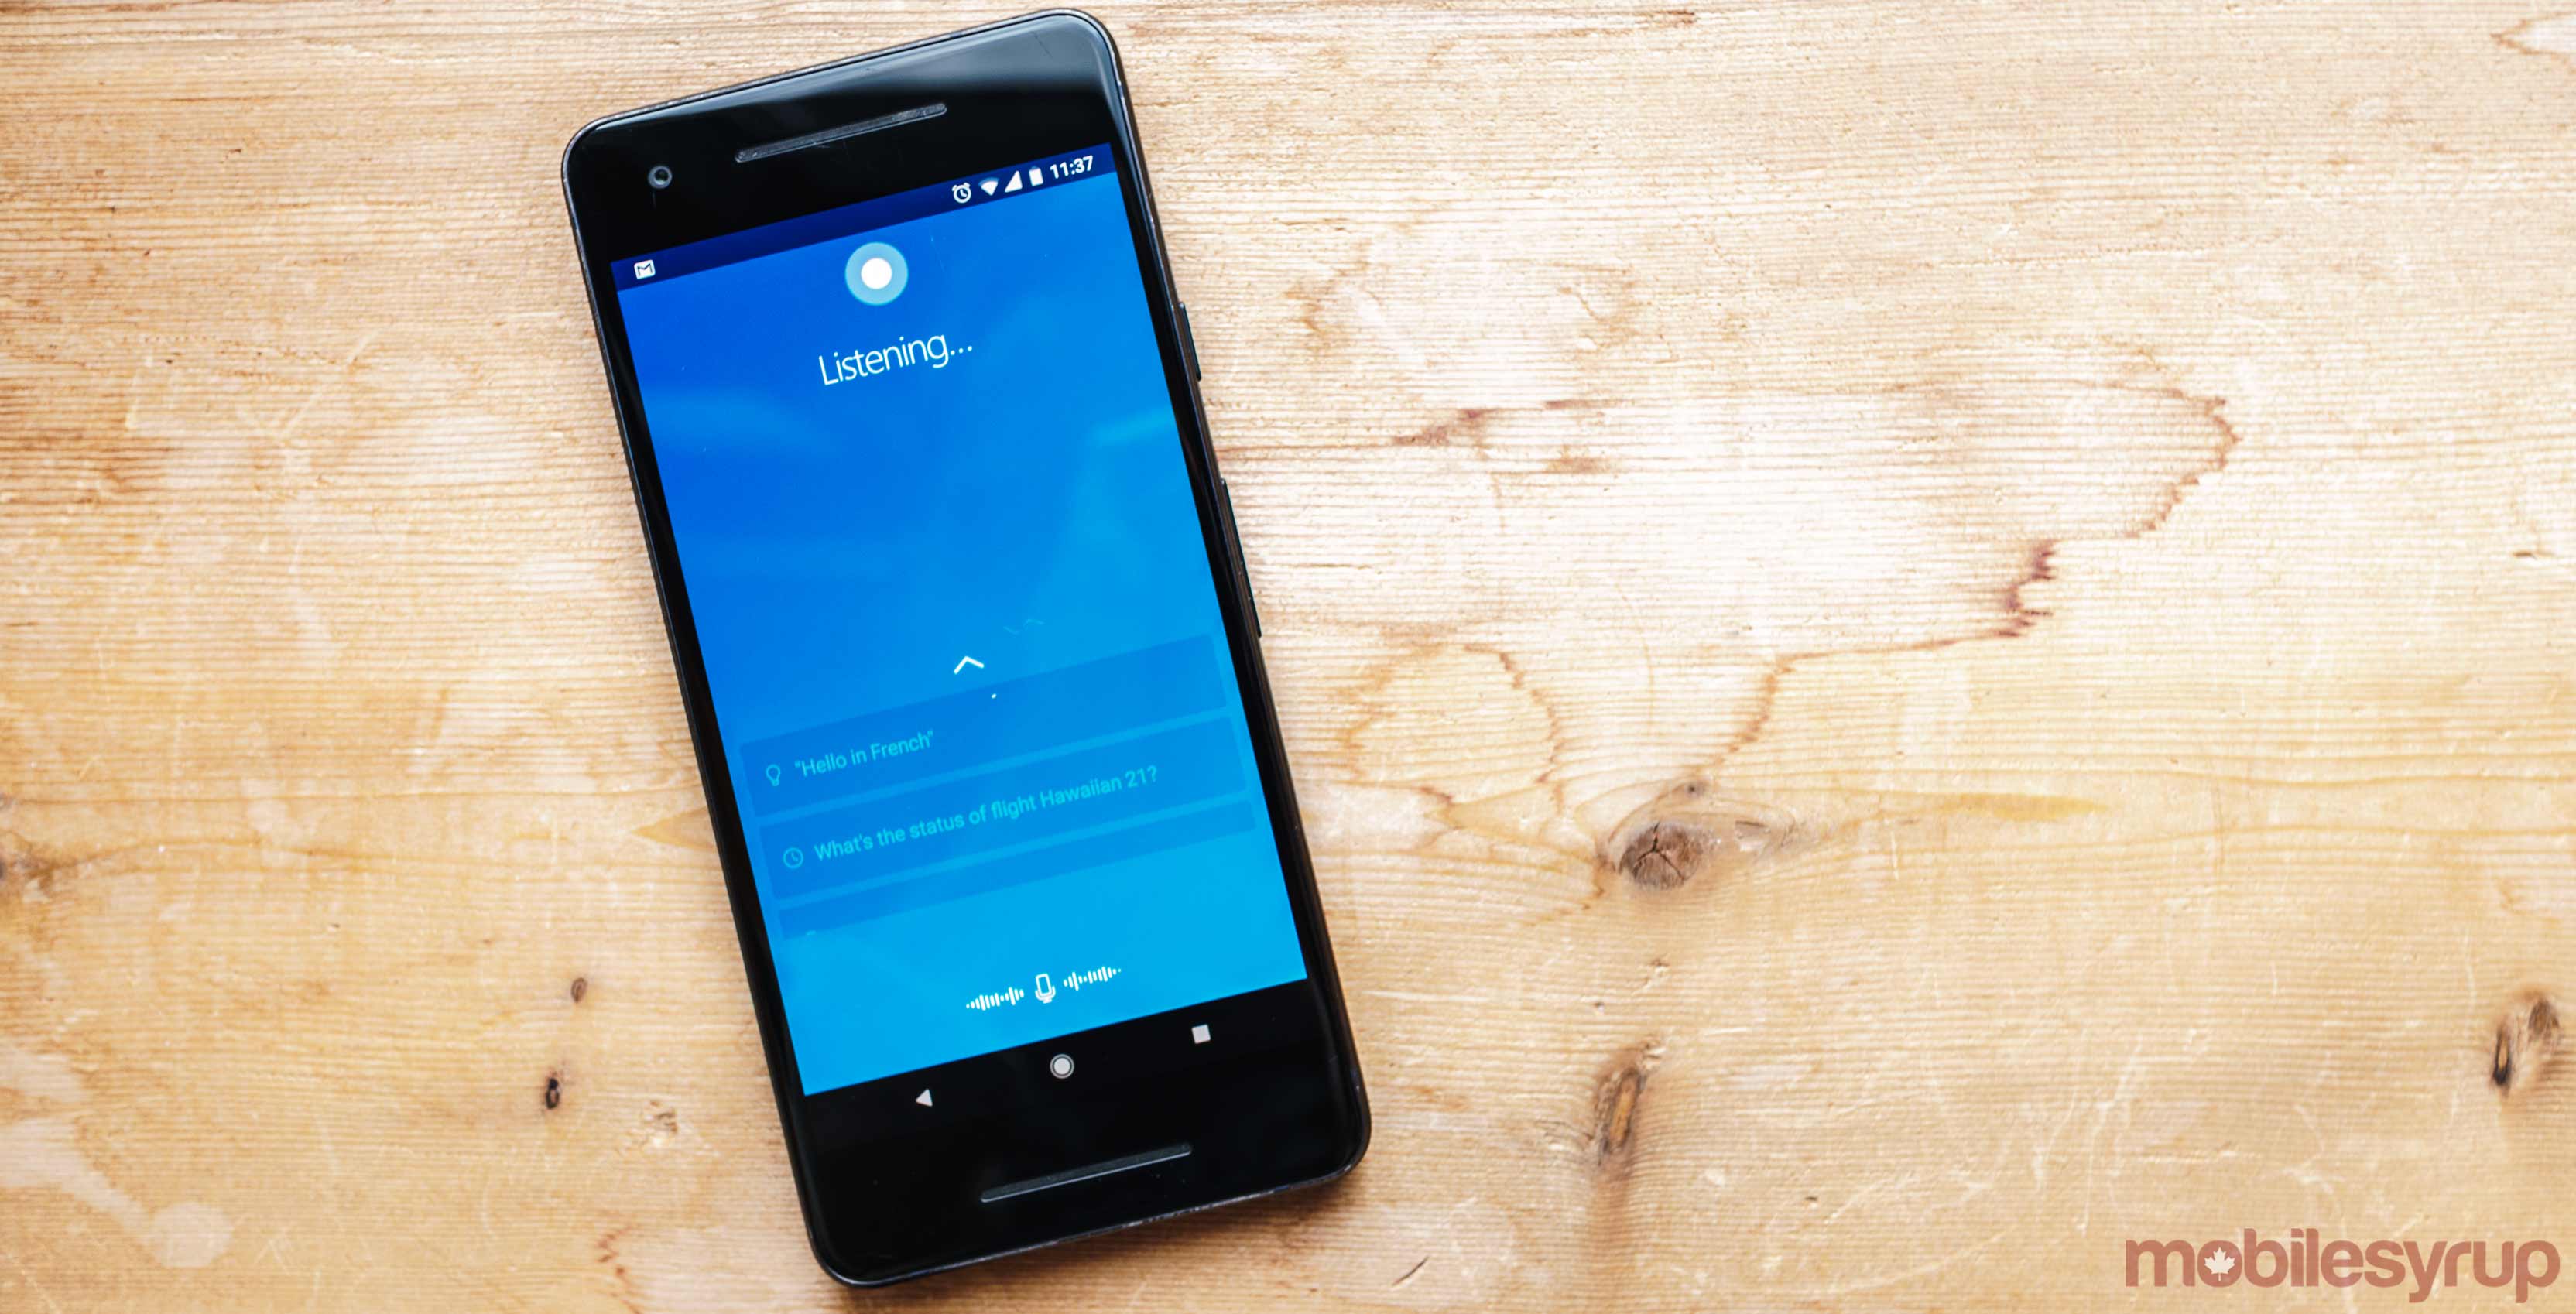 Cortana running on an Android smartphone